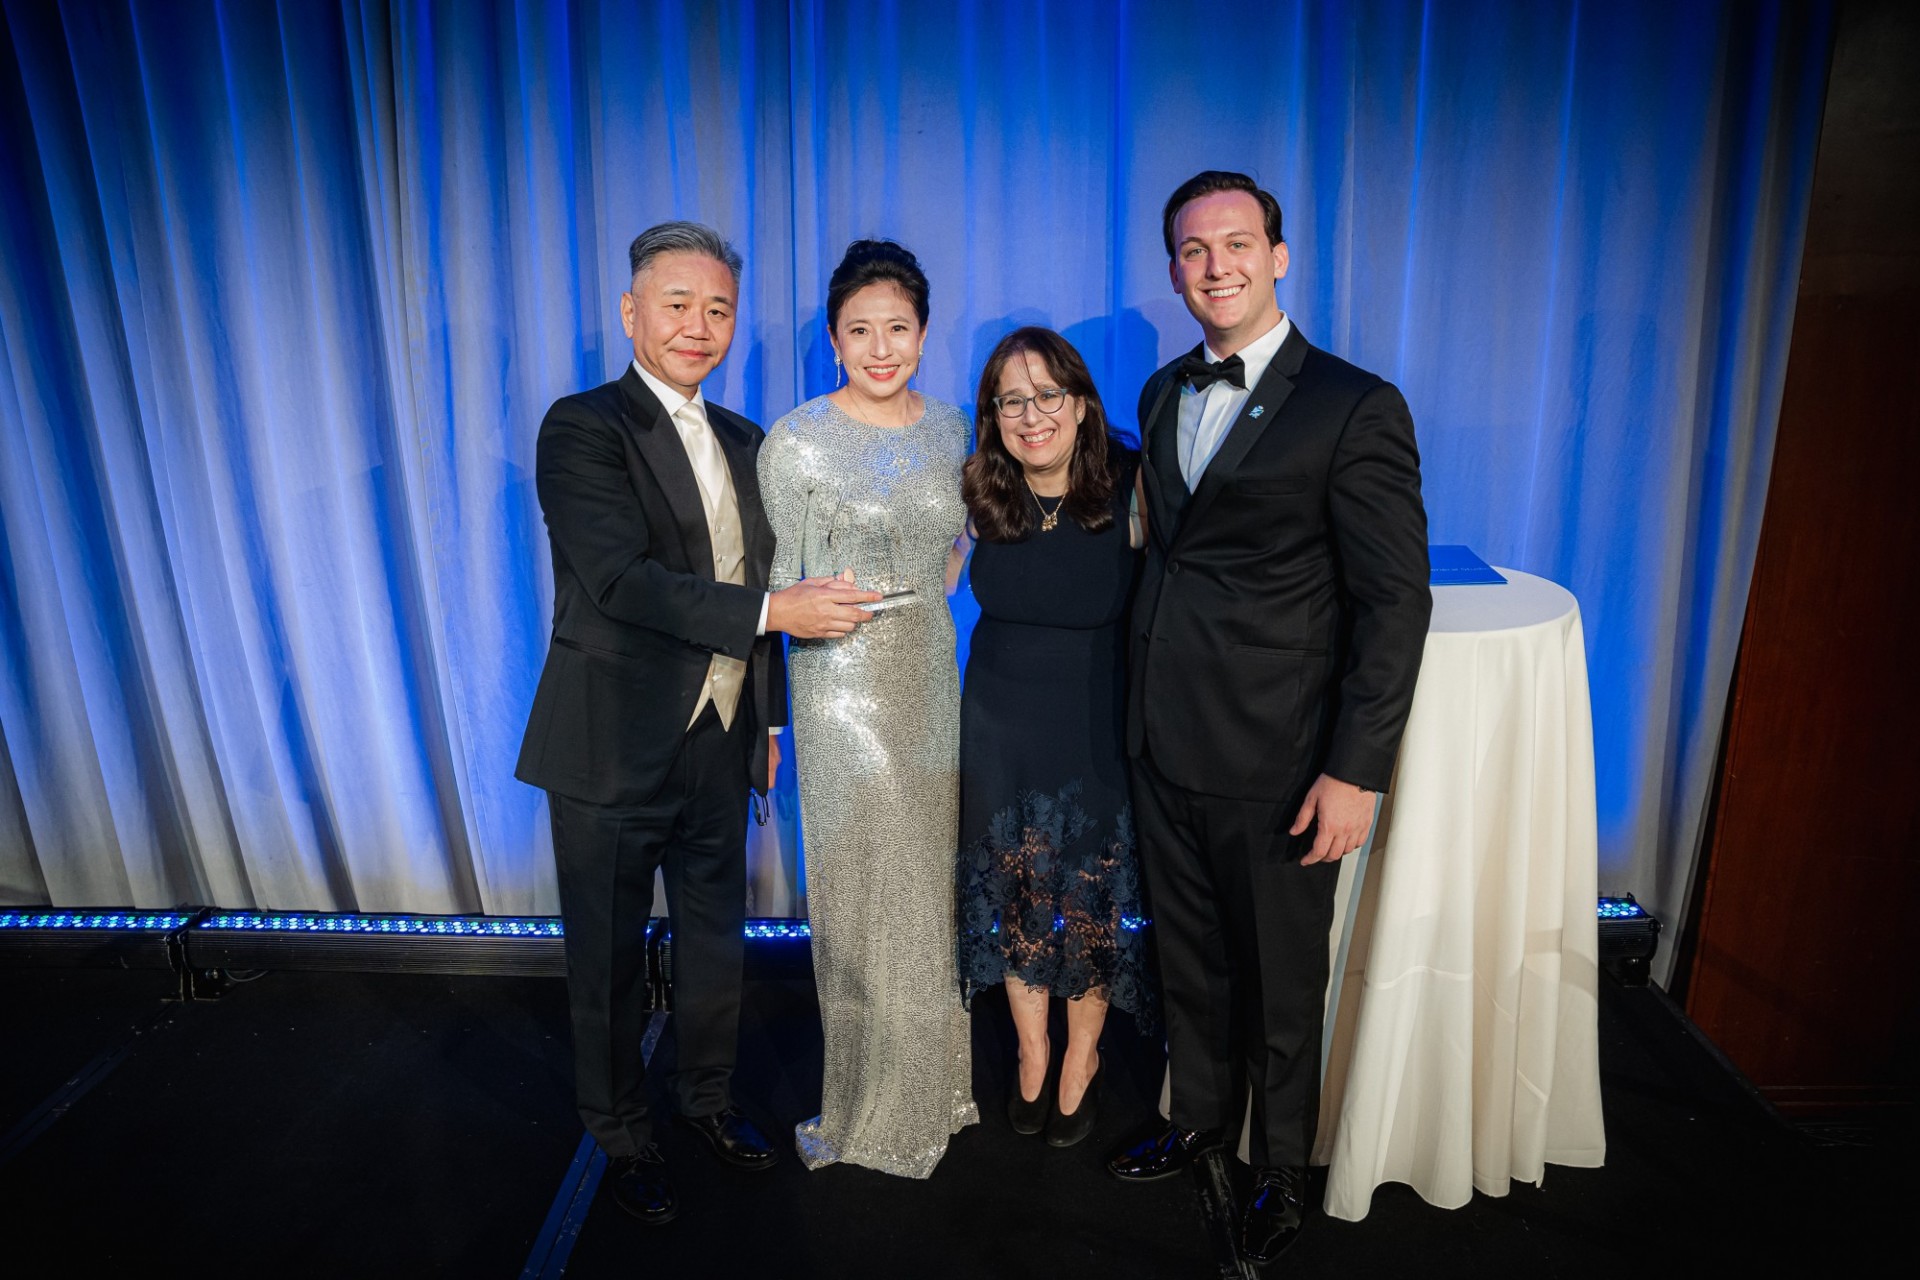 Honorees Walter and Shirley Wang with Dean Lisa Rosen-Metsch and MilVets President John Graziano